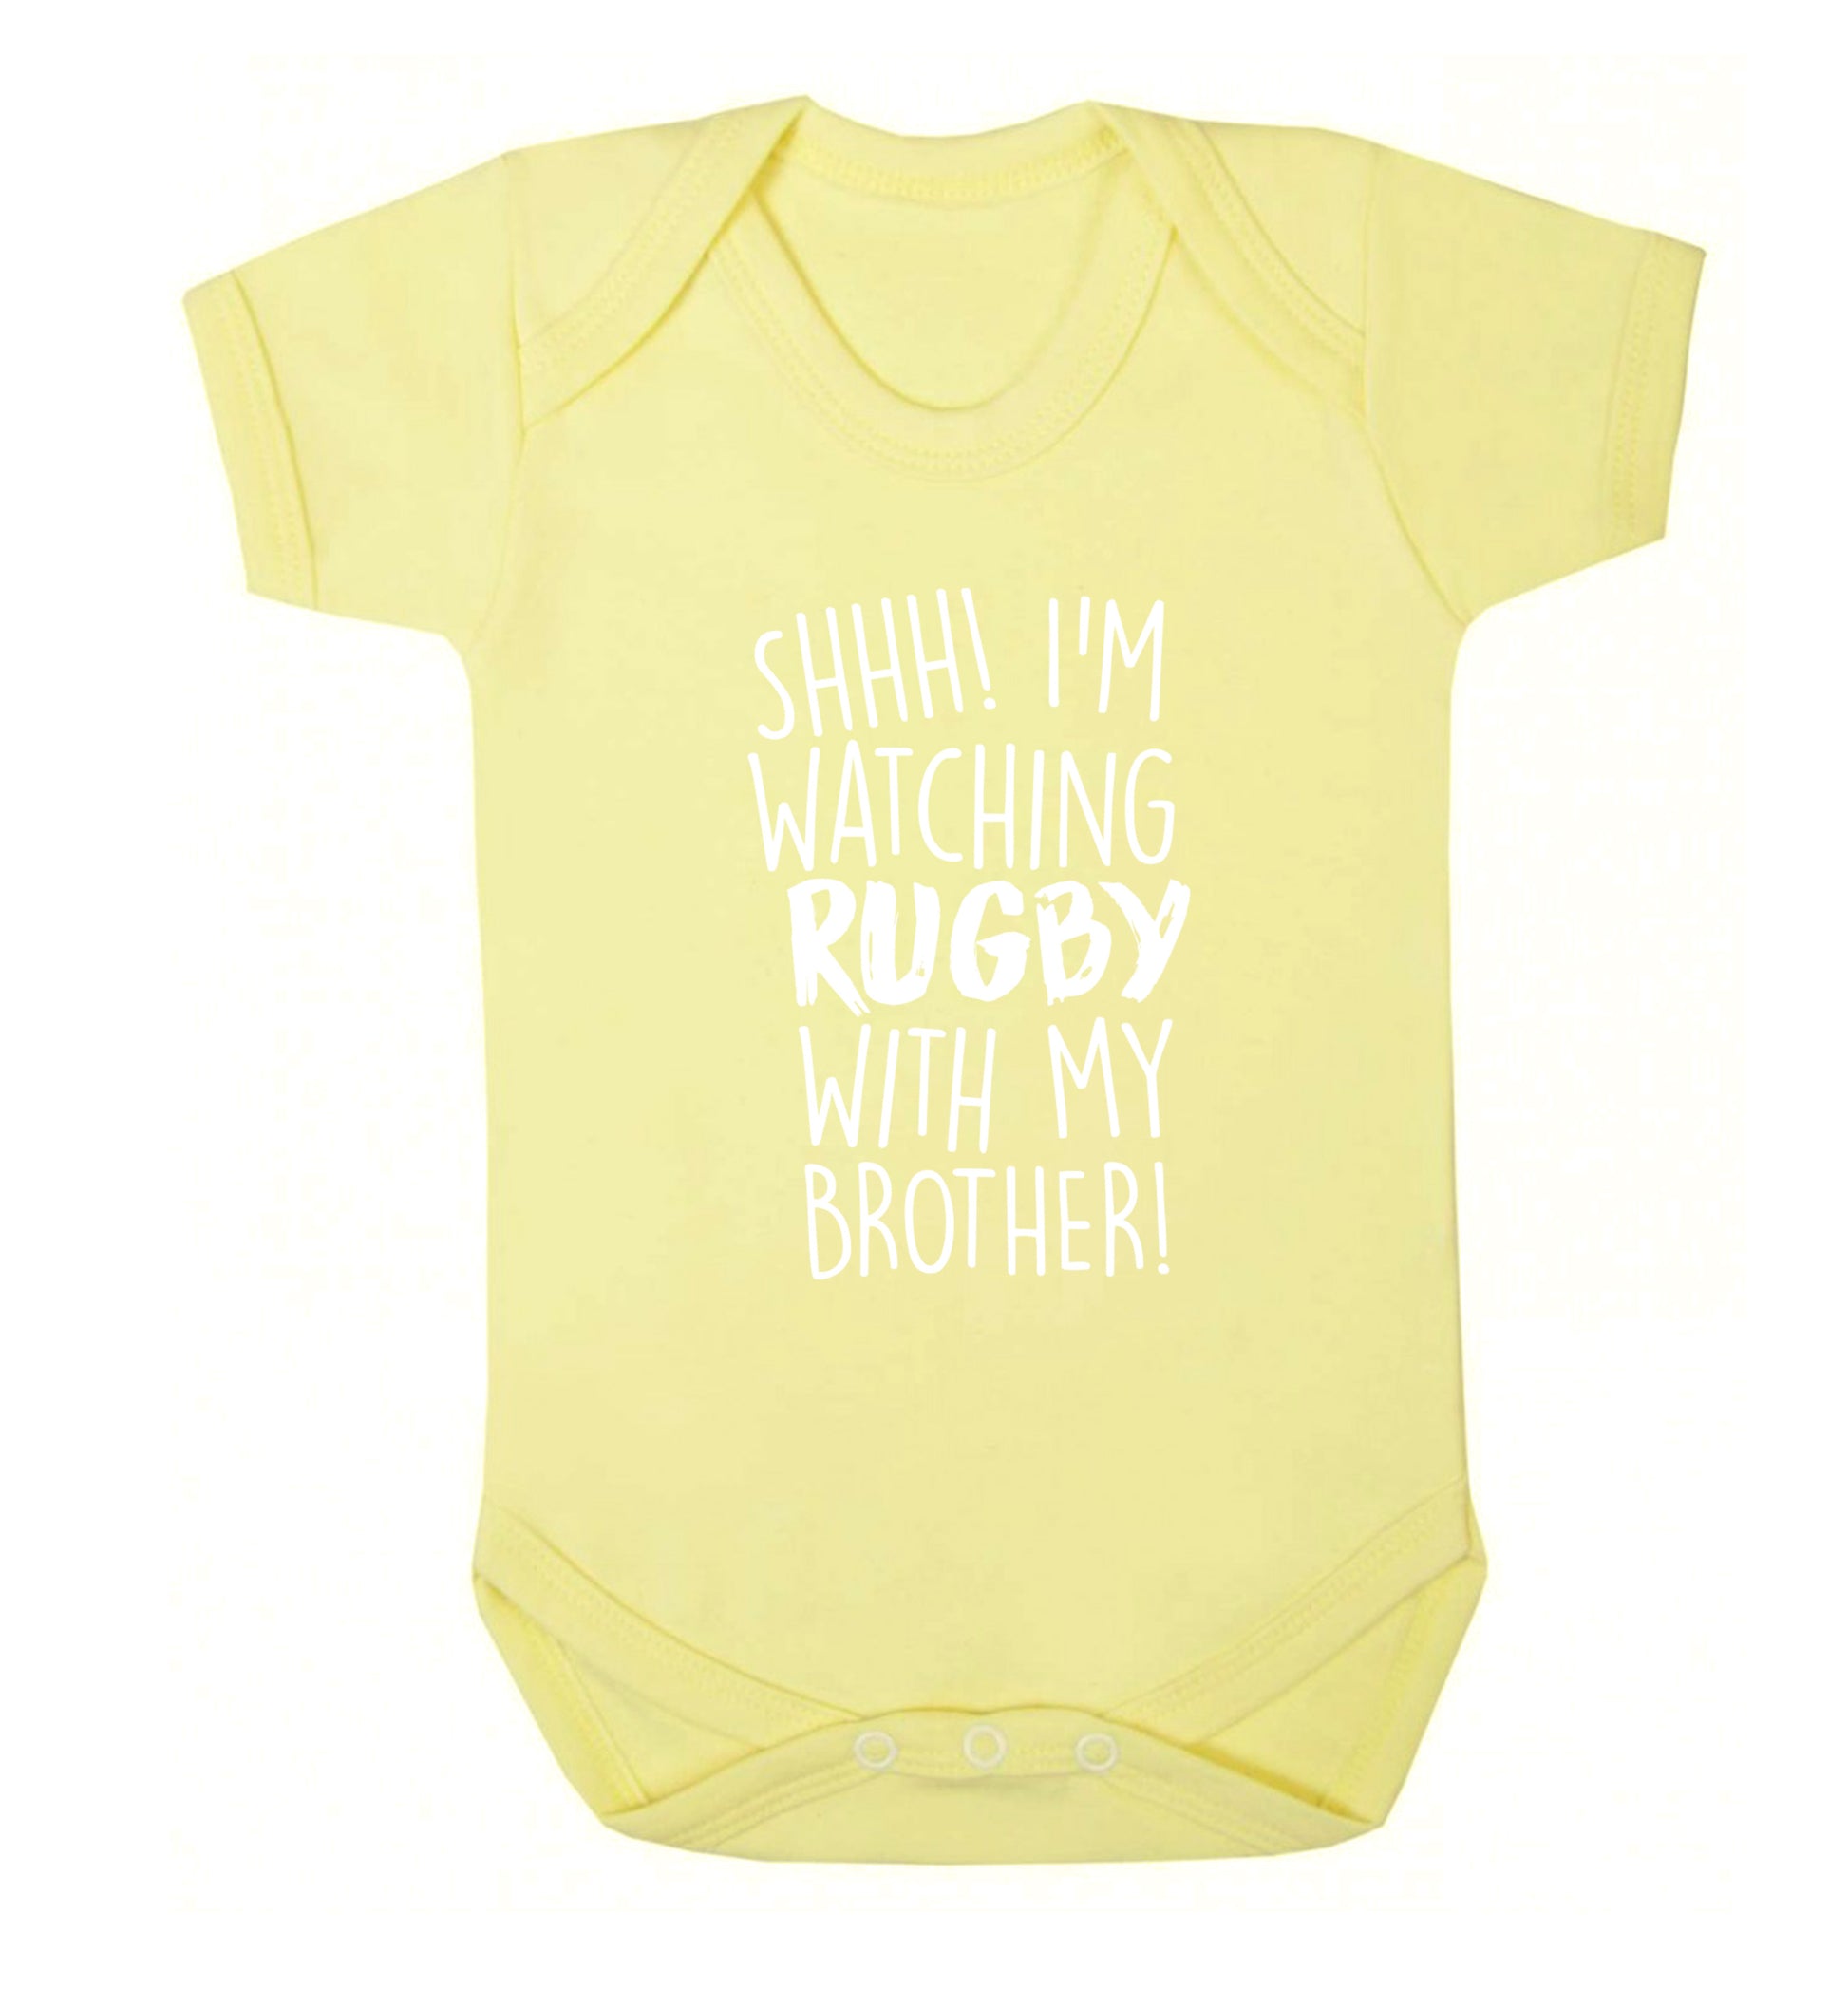 Shh... I'm watching rugby with my brother Baby Vest pale yellow 18-24 months